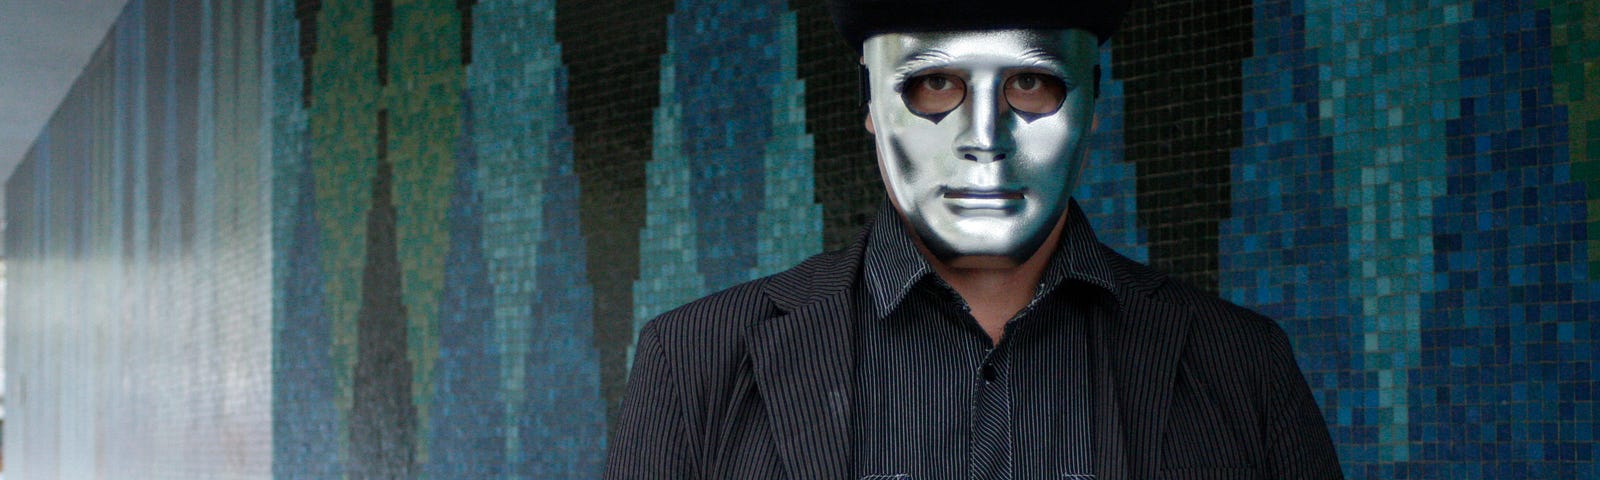 A man in black with a hat wears an ominous silver mask